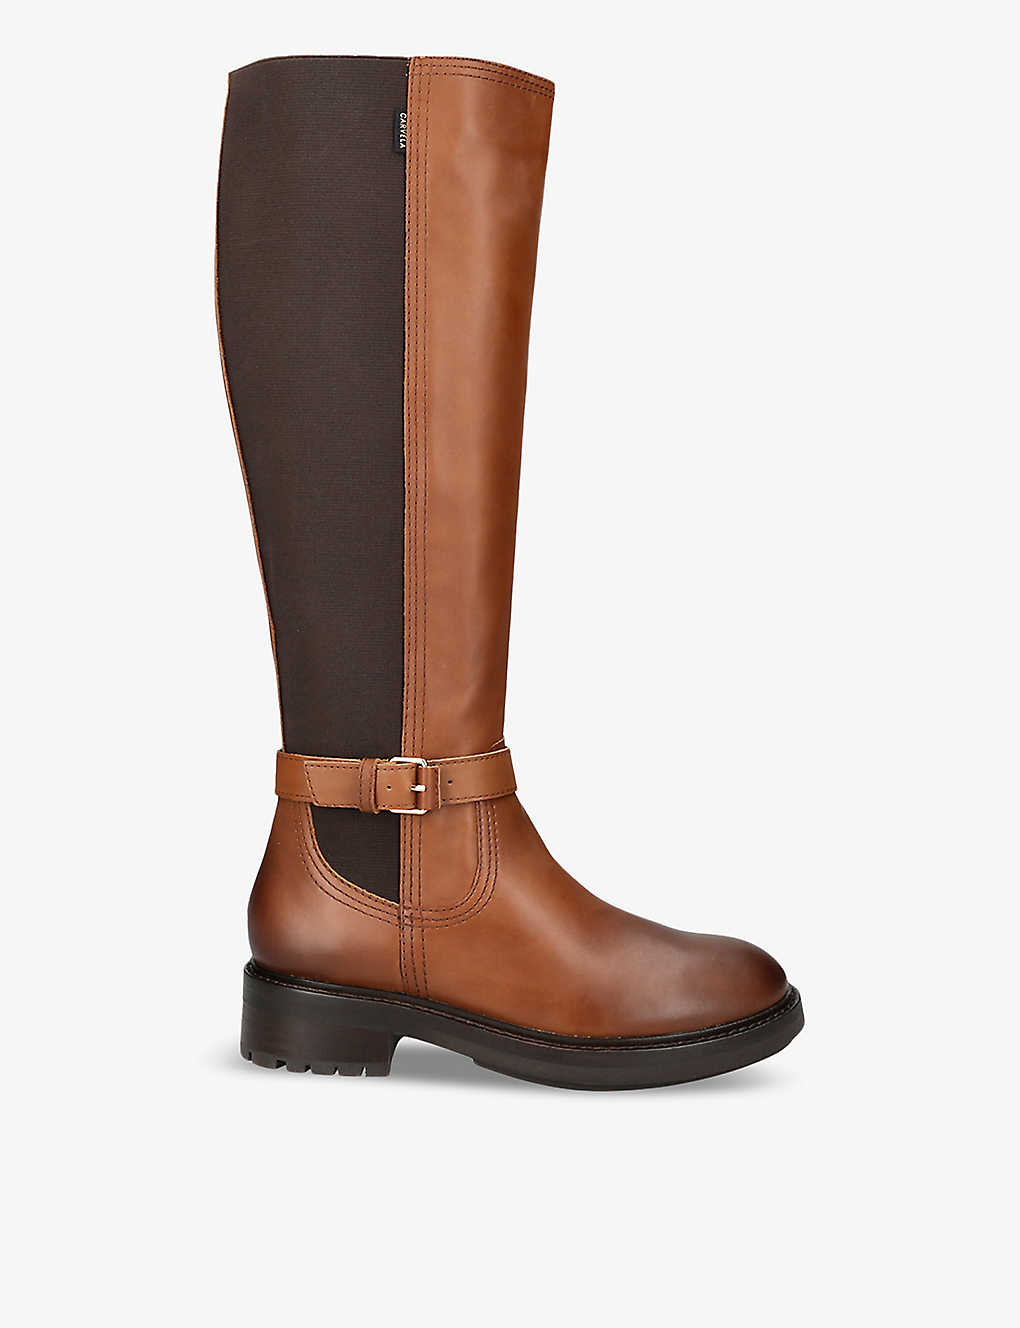 Carvela Comfort Margot High Leather Knee-high Boots In Tan